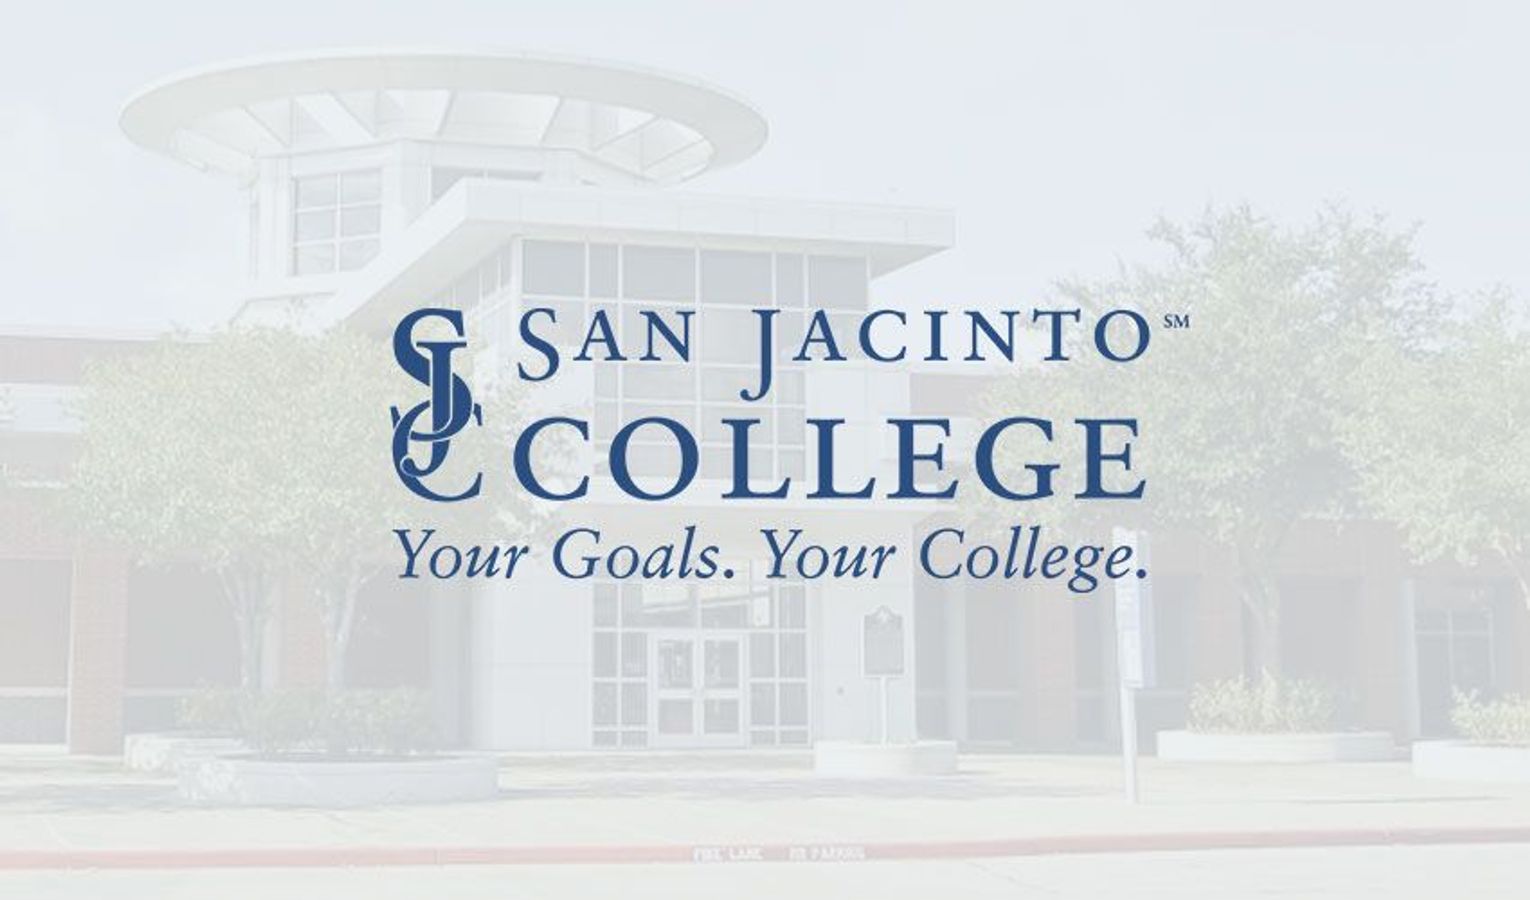 San Jacinto College: How recruiting, learning, and performing through a pandemic can be done well